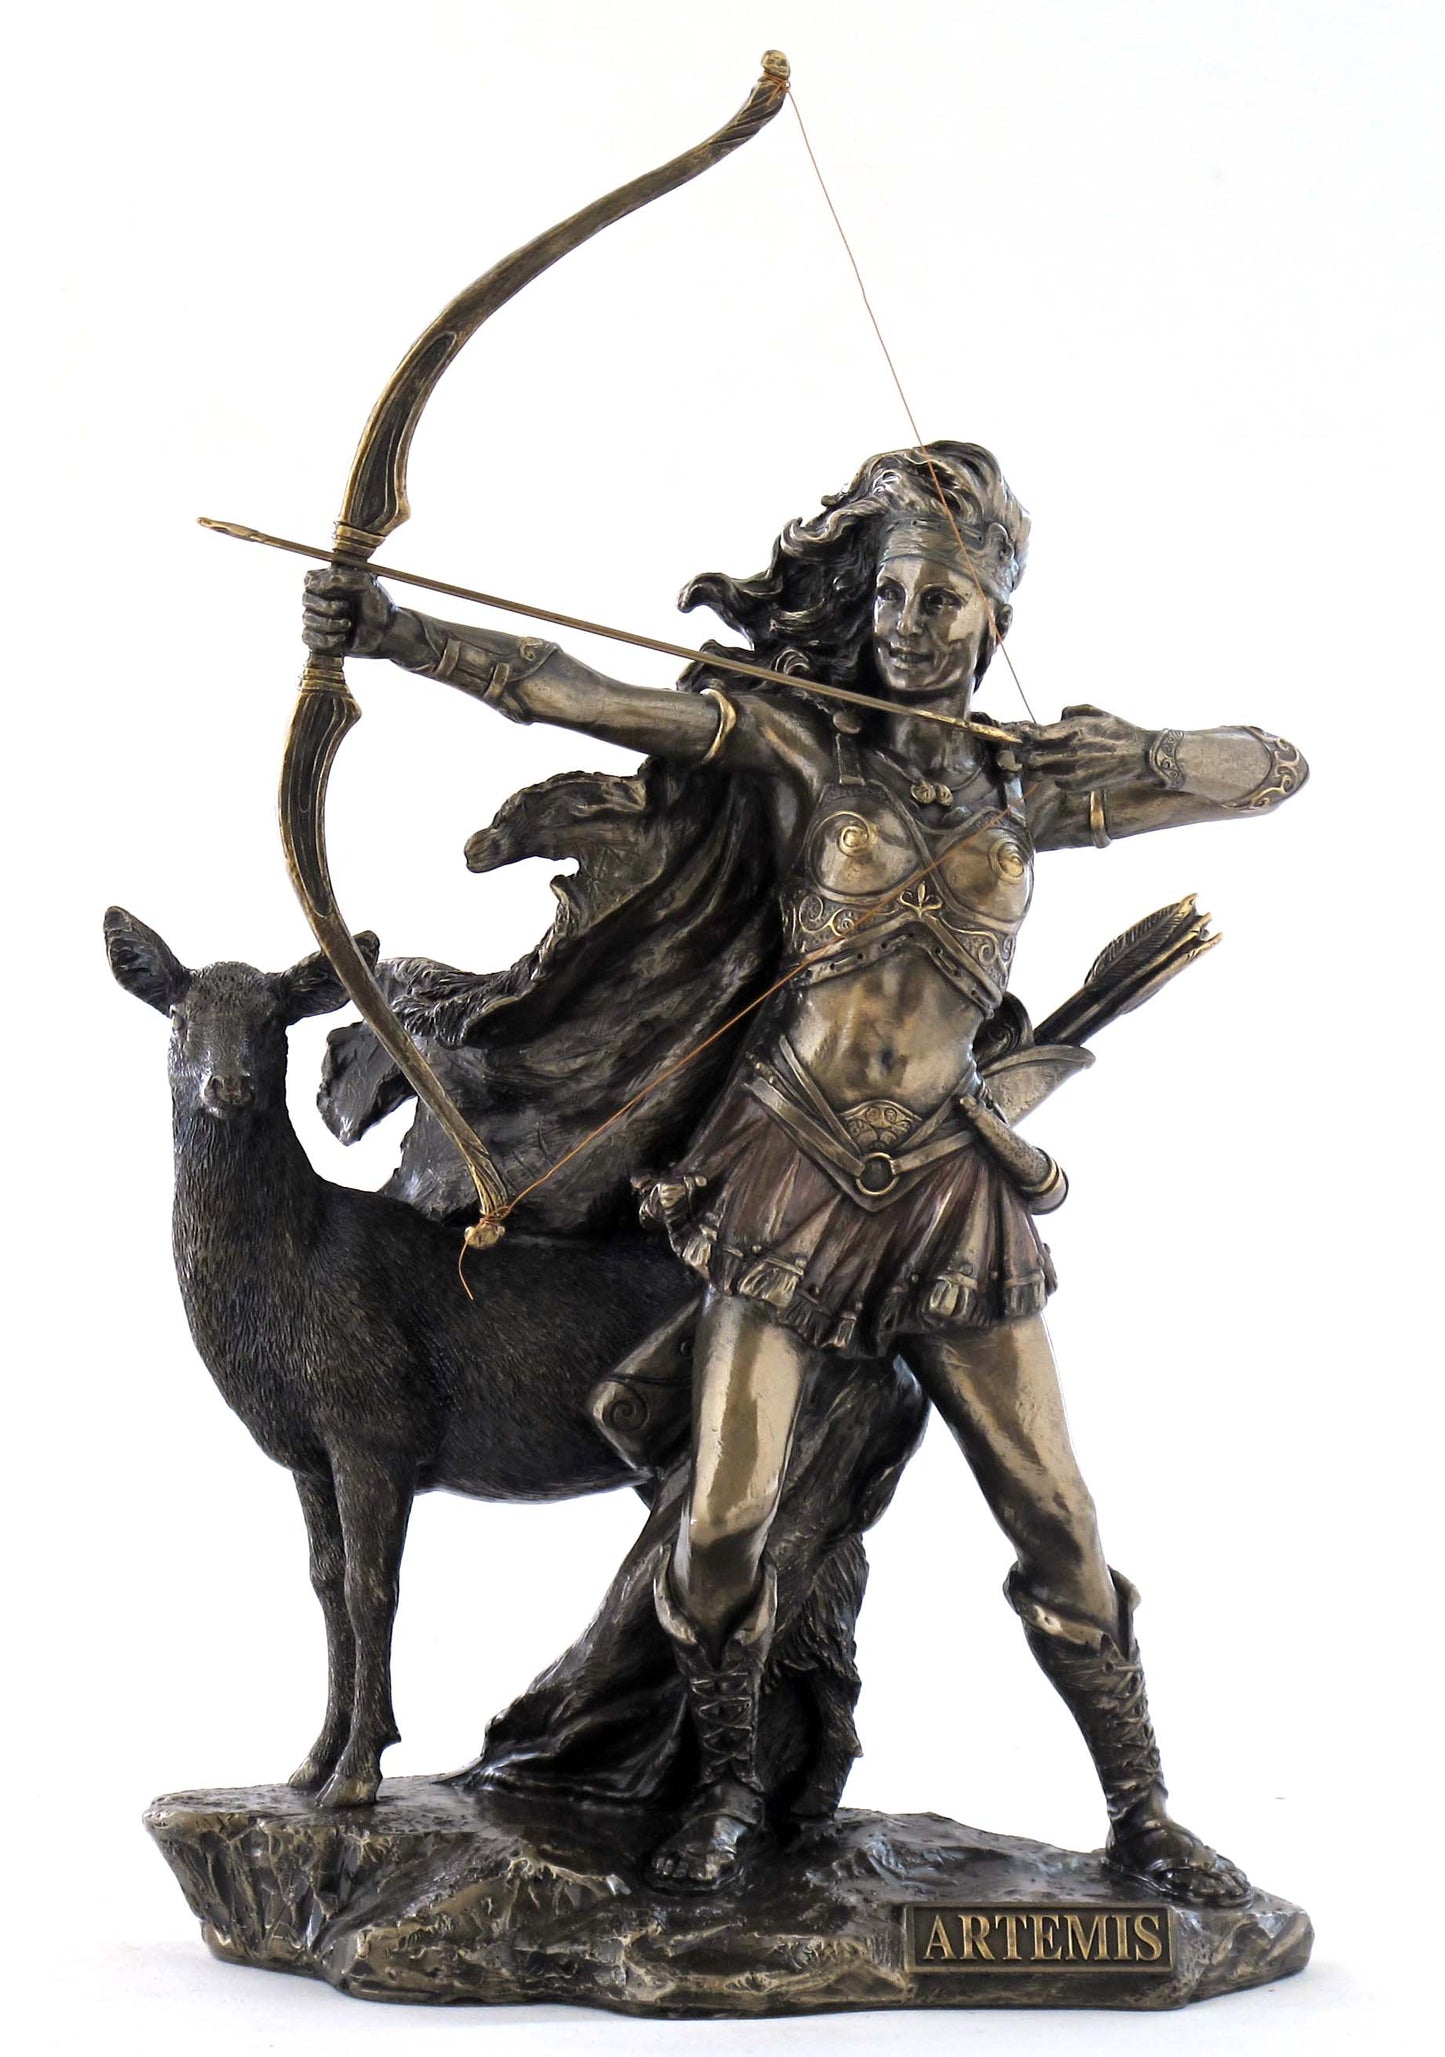 Artemis The Goddess Of Hunting And Wilderness